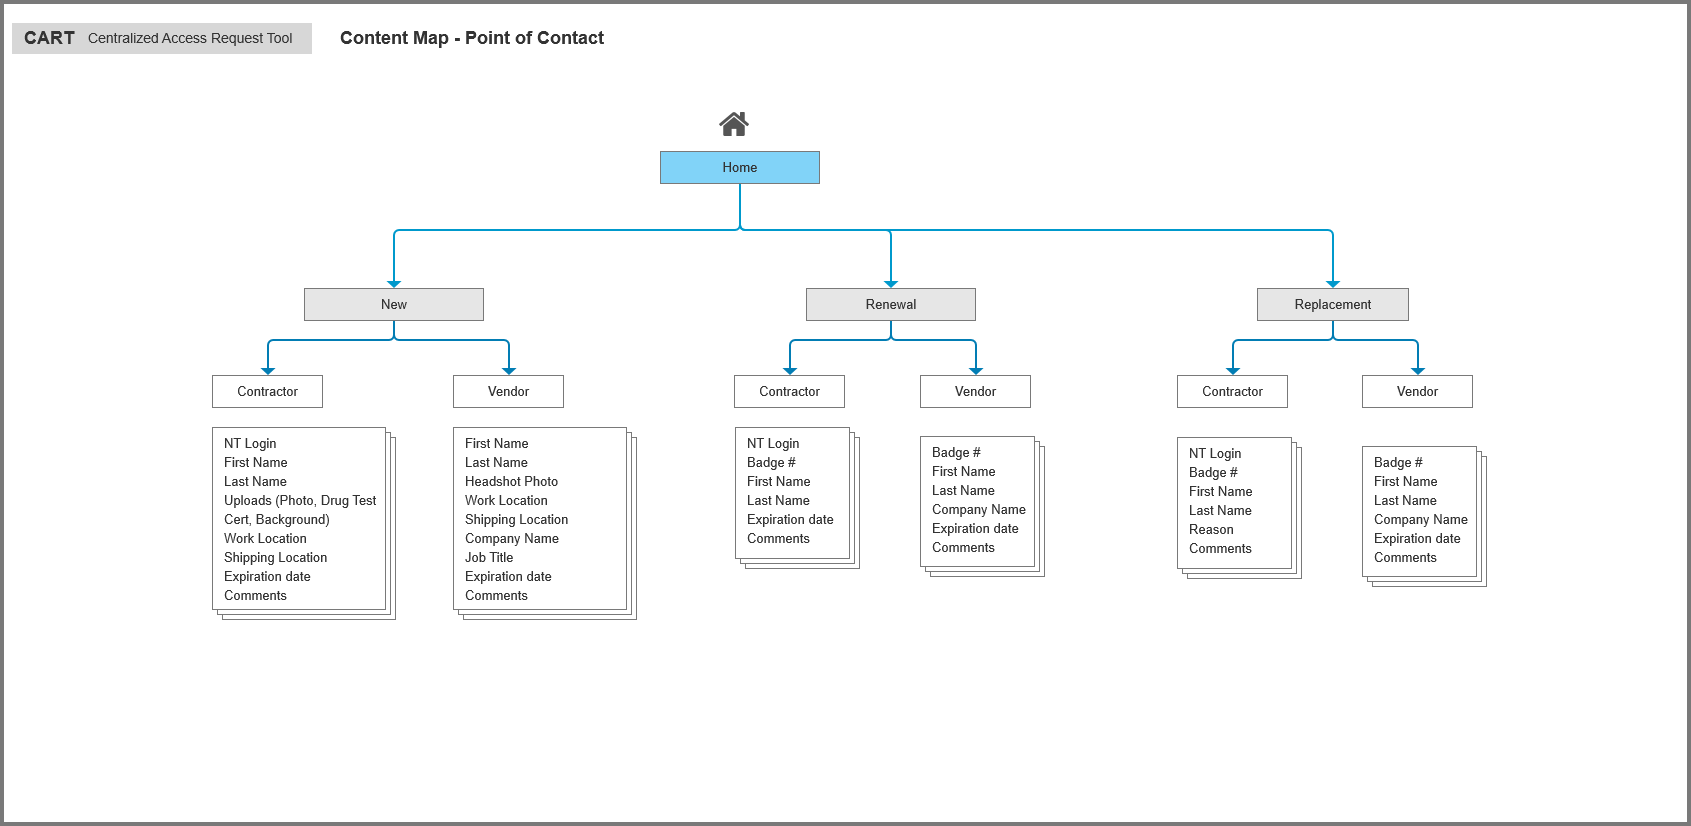 Content Map - Point of Contact